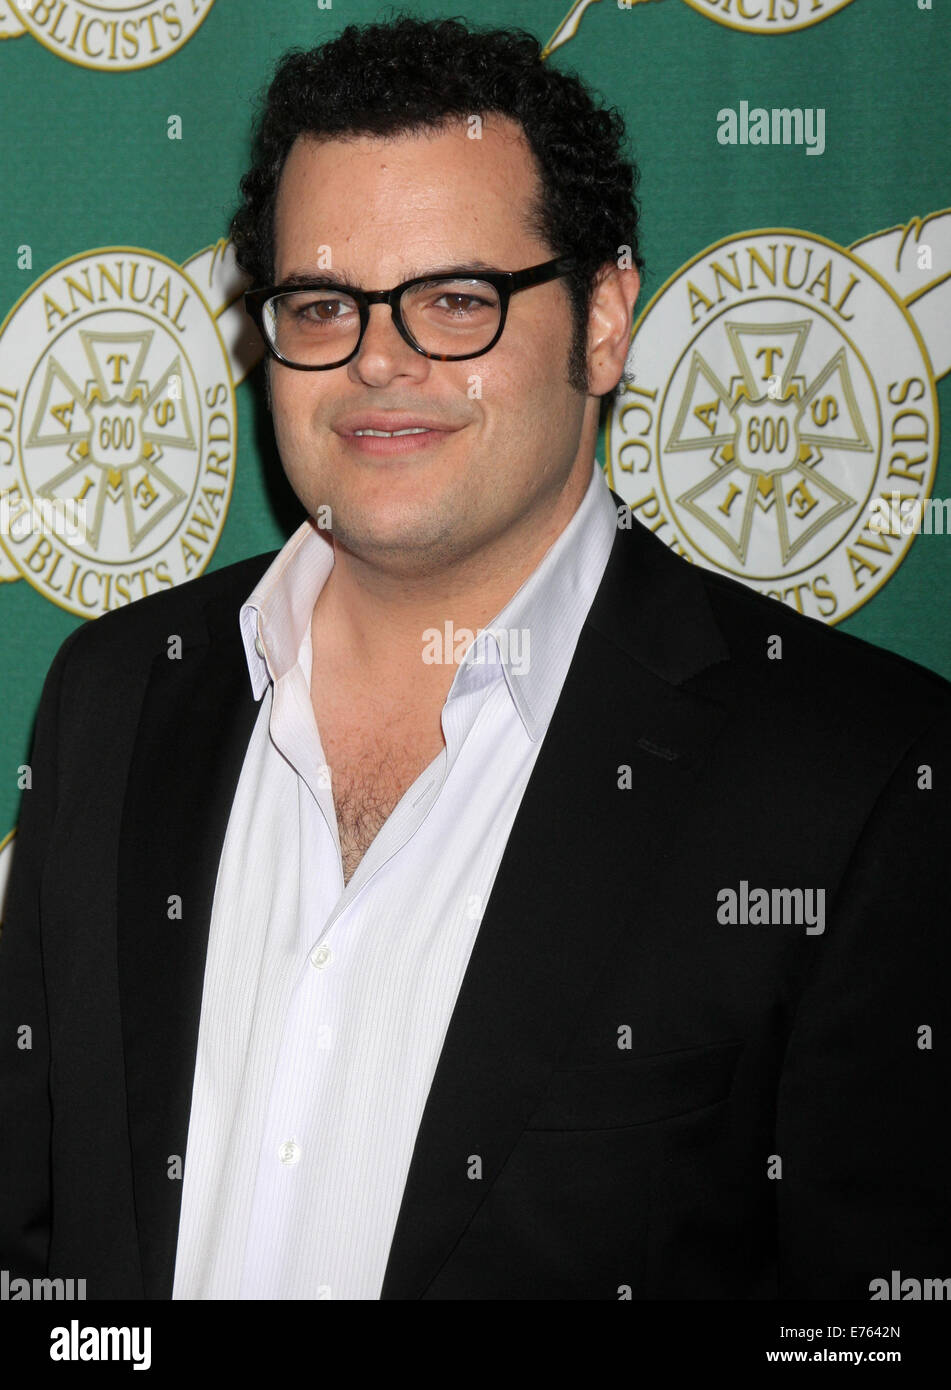 Cinematographers Guild's 51st Annual Publicists Awards Luncheon at Regent Beverly Wilshire Hotel - Arrivals  Featuring: Josh Gad Where: Los Angeles, California, United States When: 28 Feb 2014 Stock Photo